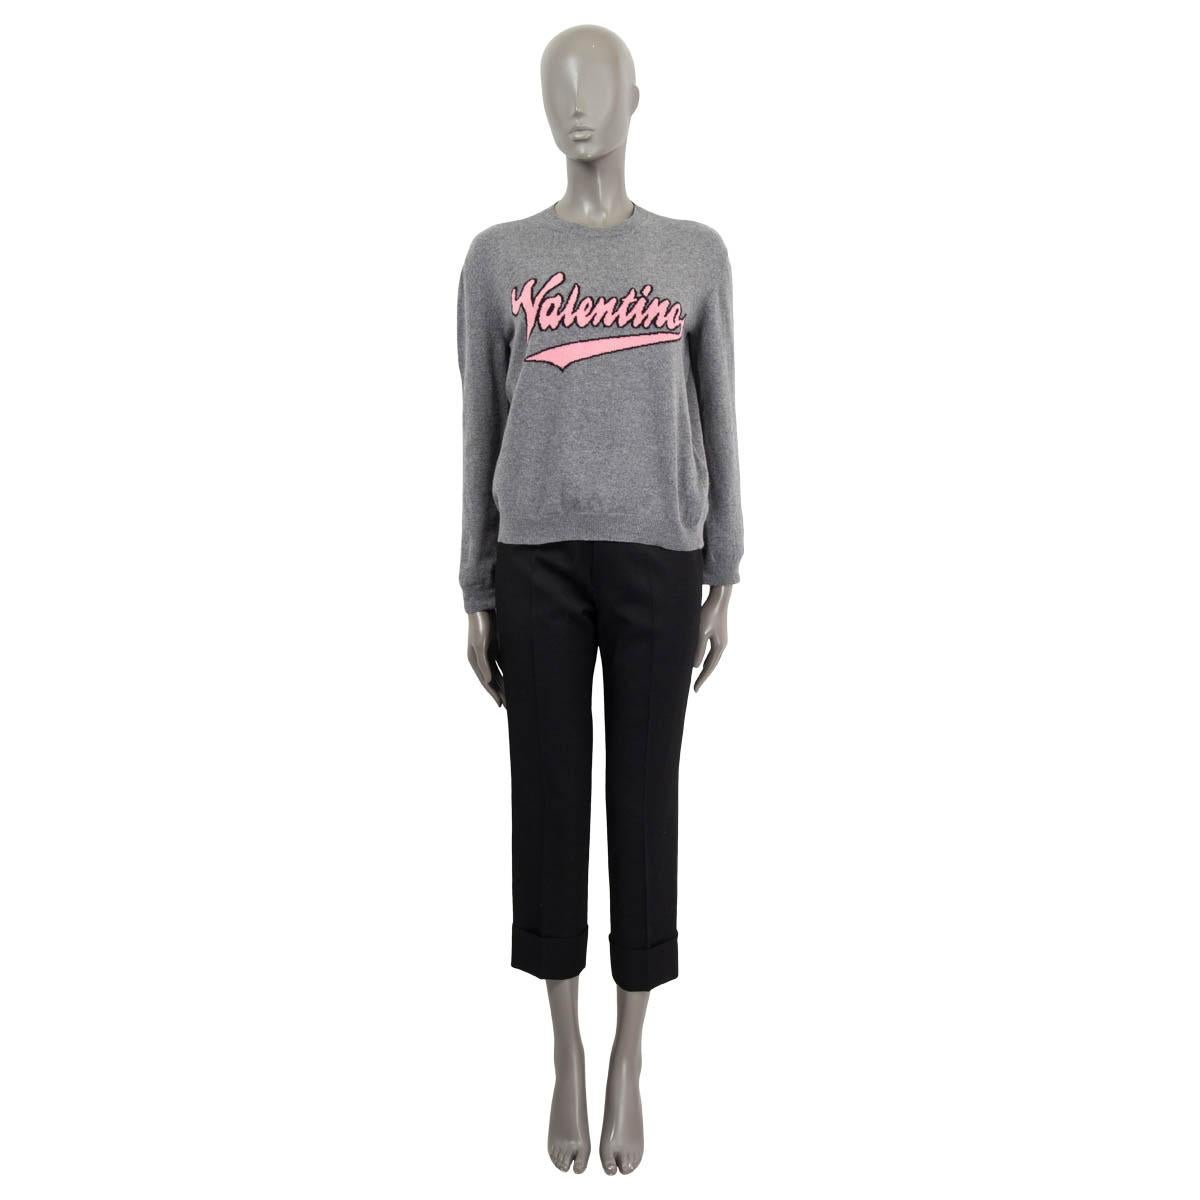 100% authentic Valentino Valentino logo sweater in gray wool (70%) and cashmere (30%). Features a crew neck and long sleeves. Has been worn once and is in virtually new condition.

Measurements
Tag Size	M
Size	M
Shoulder Width	88cm